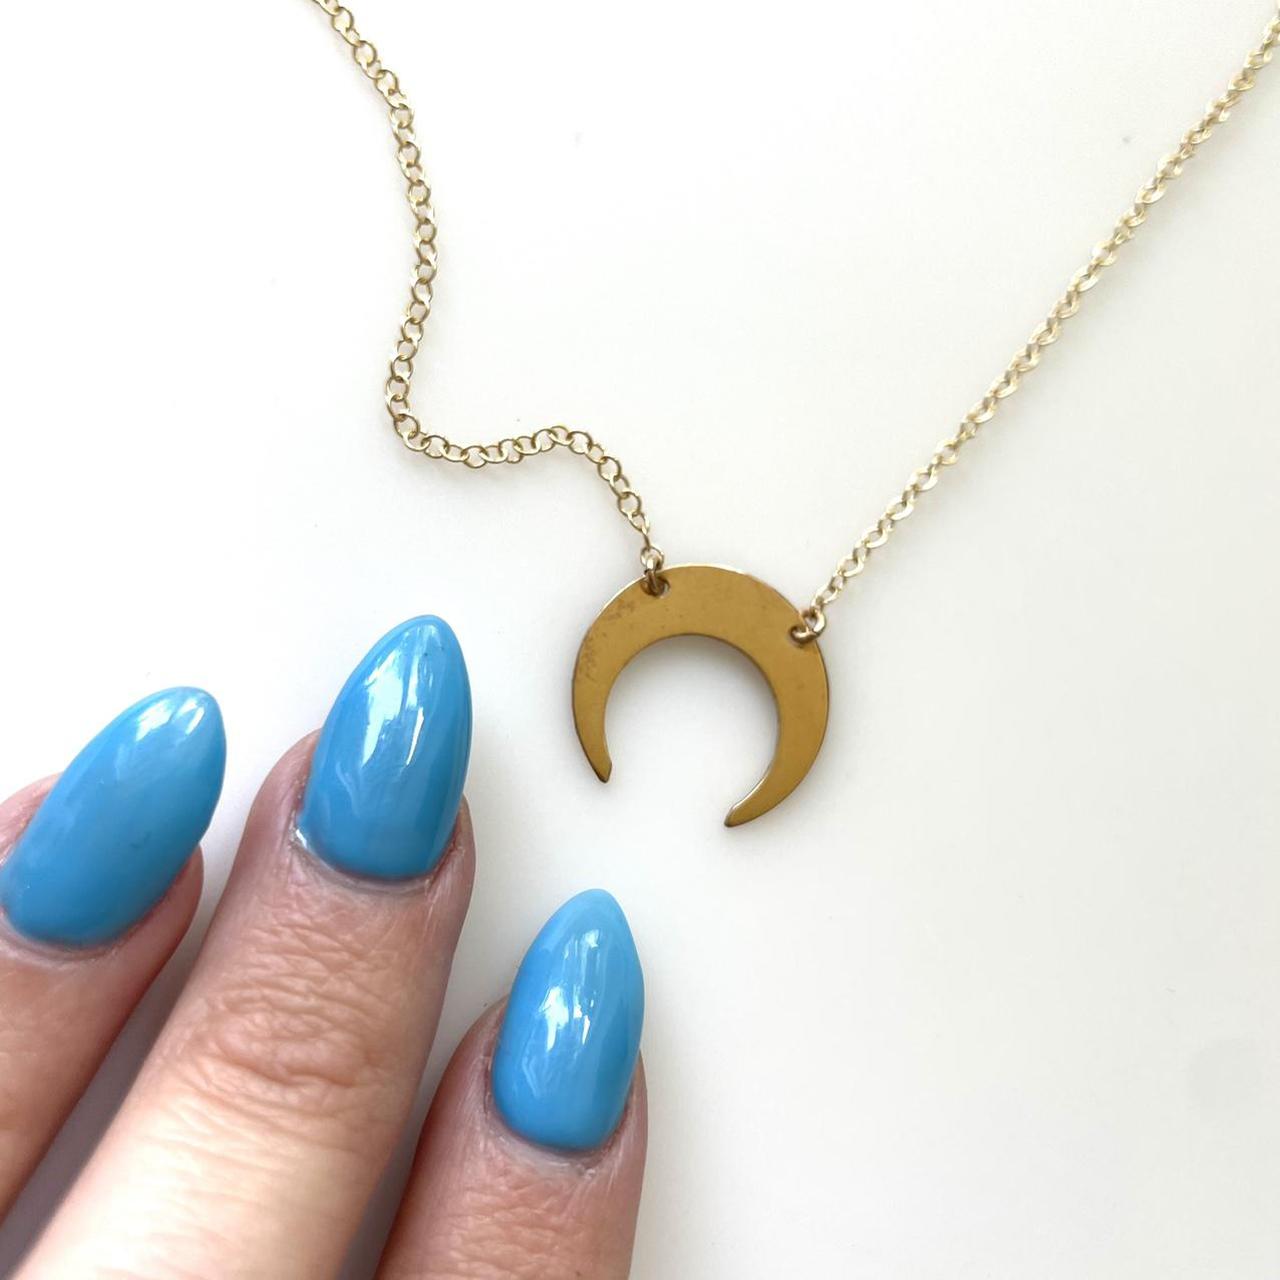 Product Image 1 - Handmade 14K Gold fill Crescent